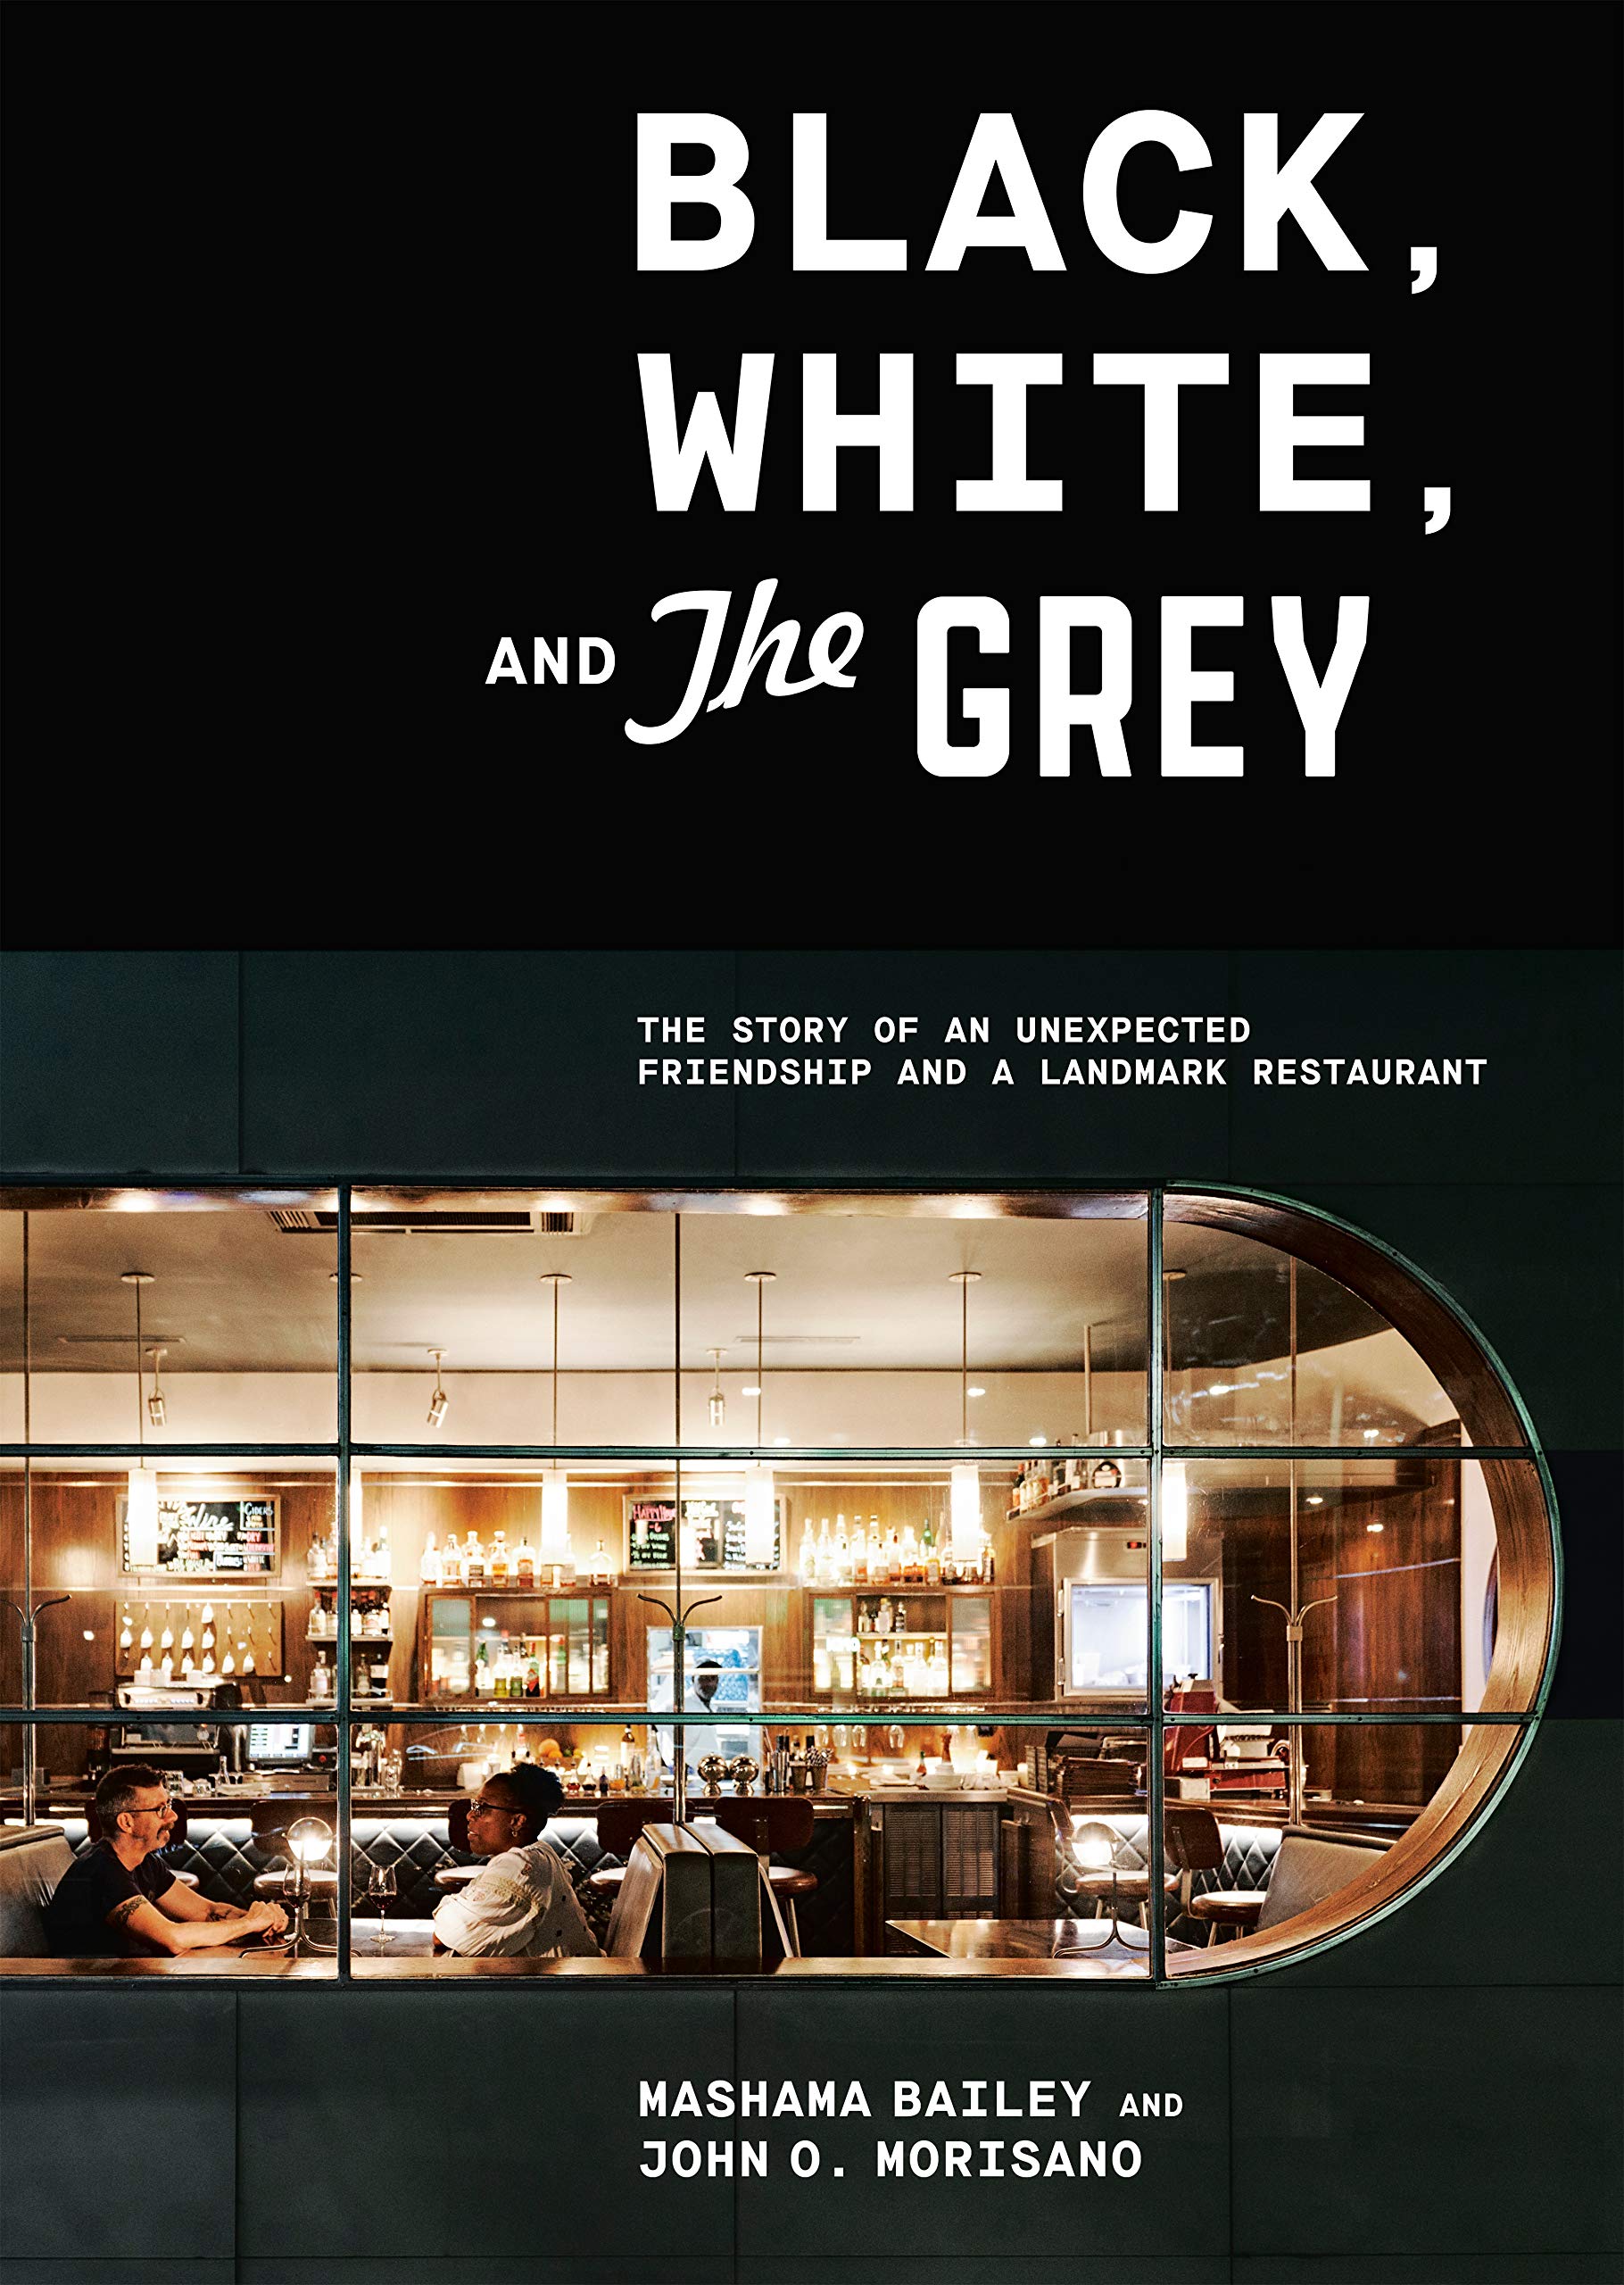 Black, White, and The Grey: The Story of an Unexpected Friendship and a Beloved Restaurant (Mashama Bailey, John O. Morisano) *Signed*